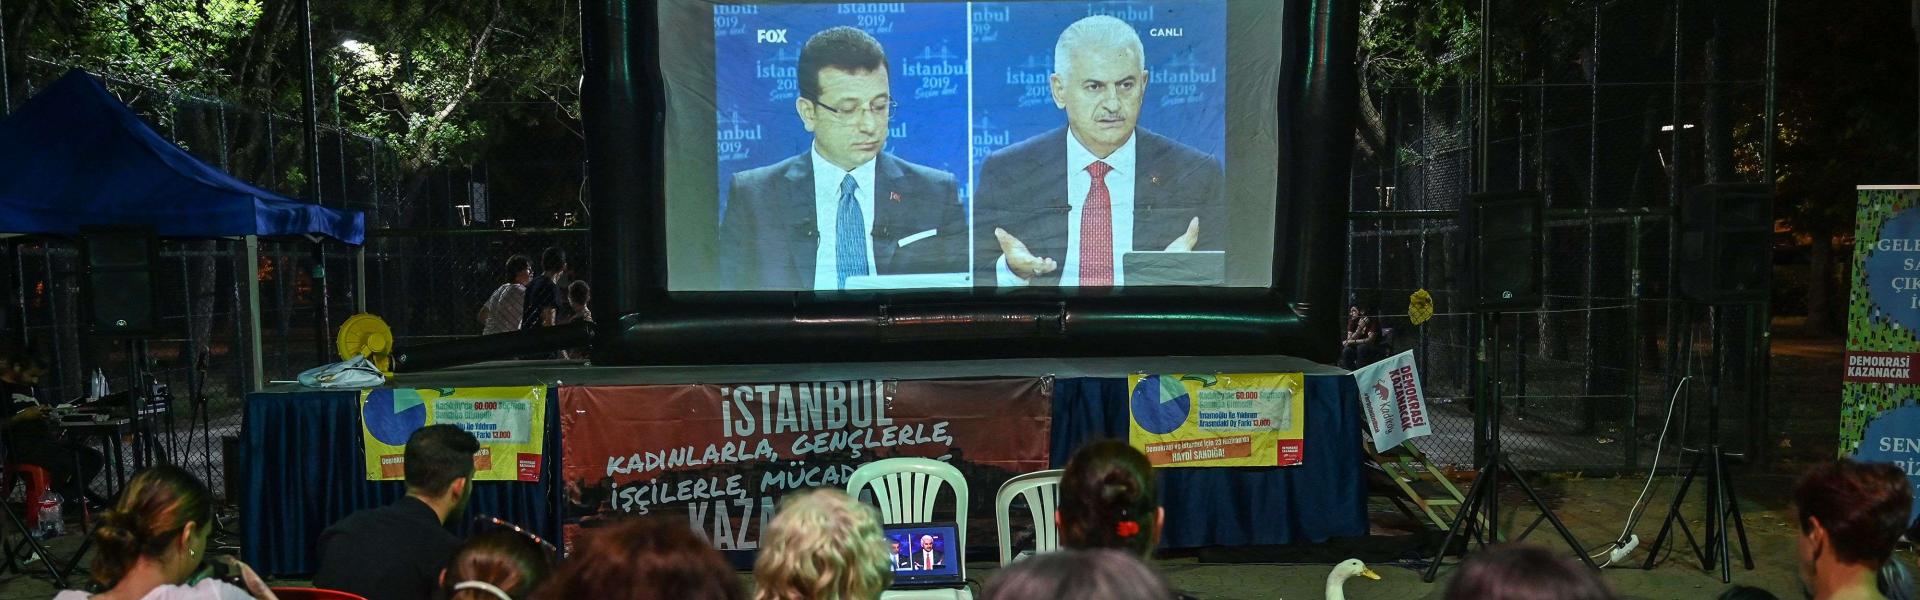 Ruling party cries foul after live debate ahead of Istanbul rerun